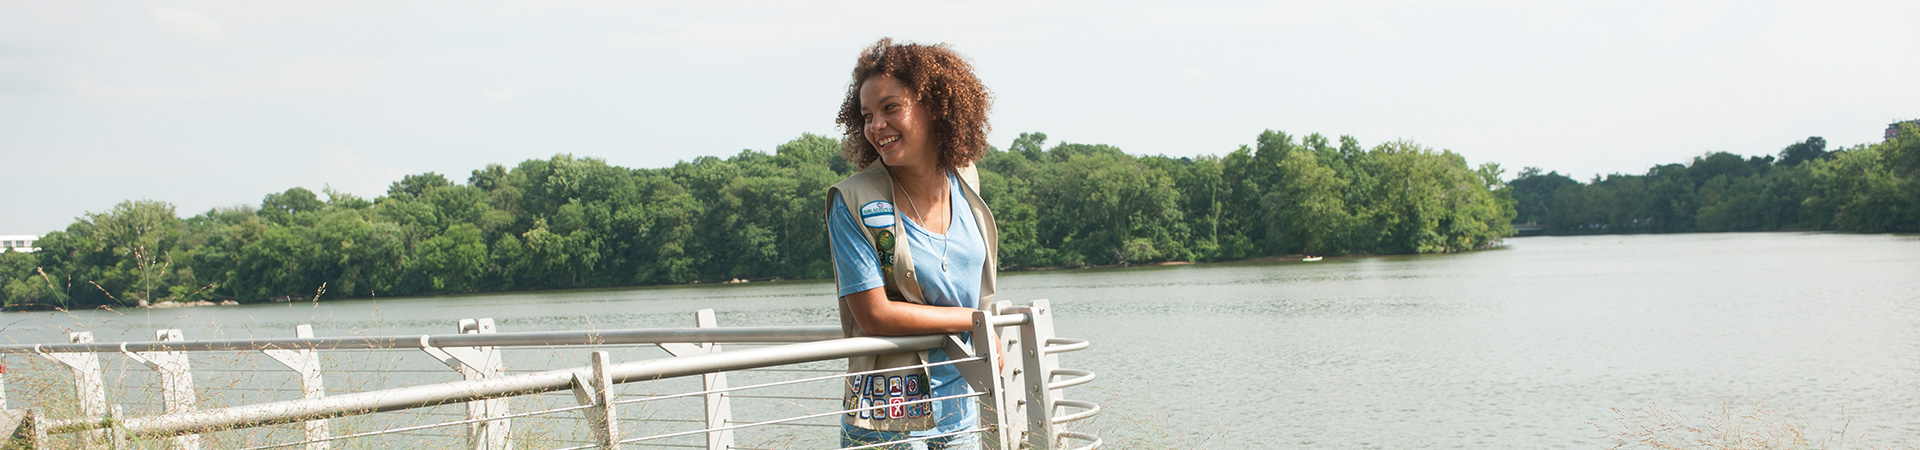  girl scout wearing vest and smiling as she stands at the waterfront 